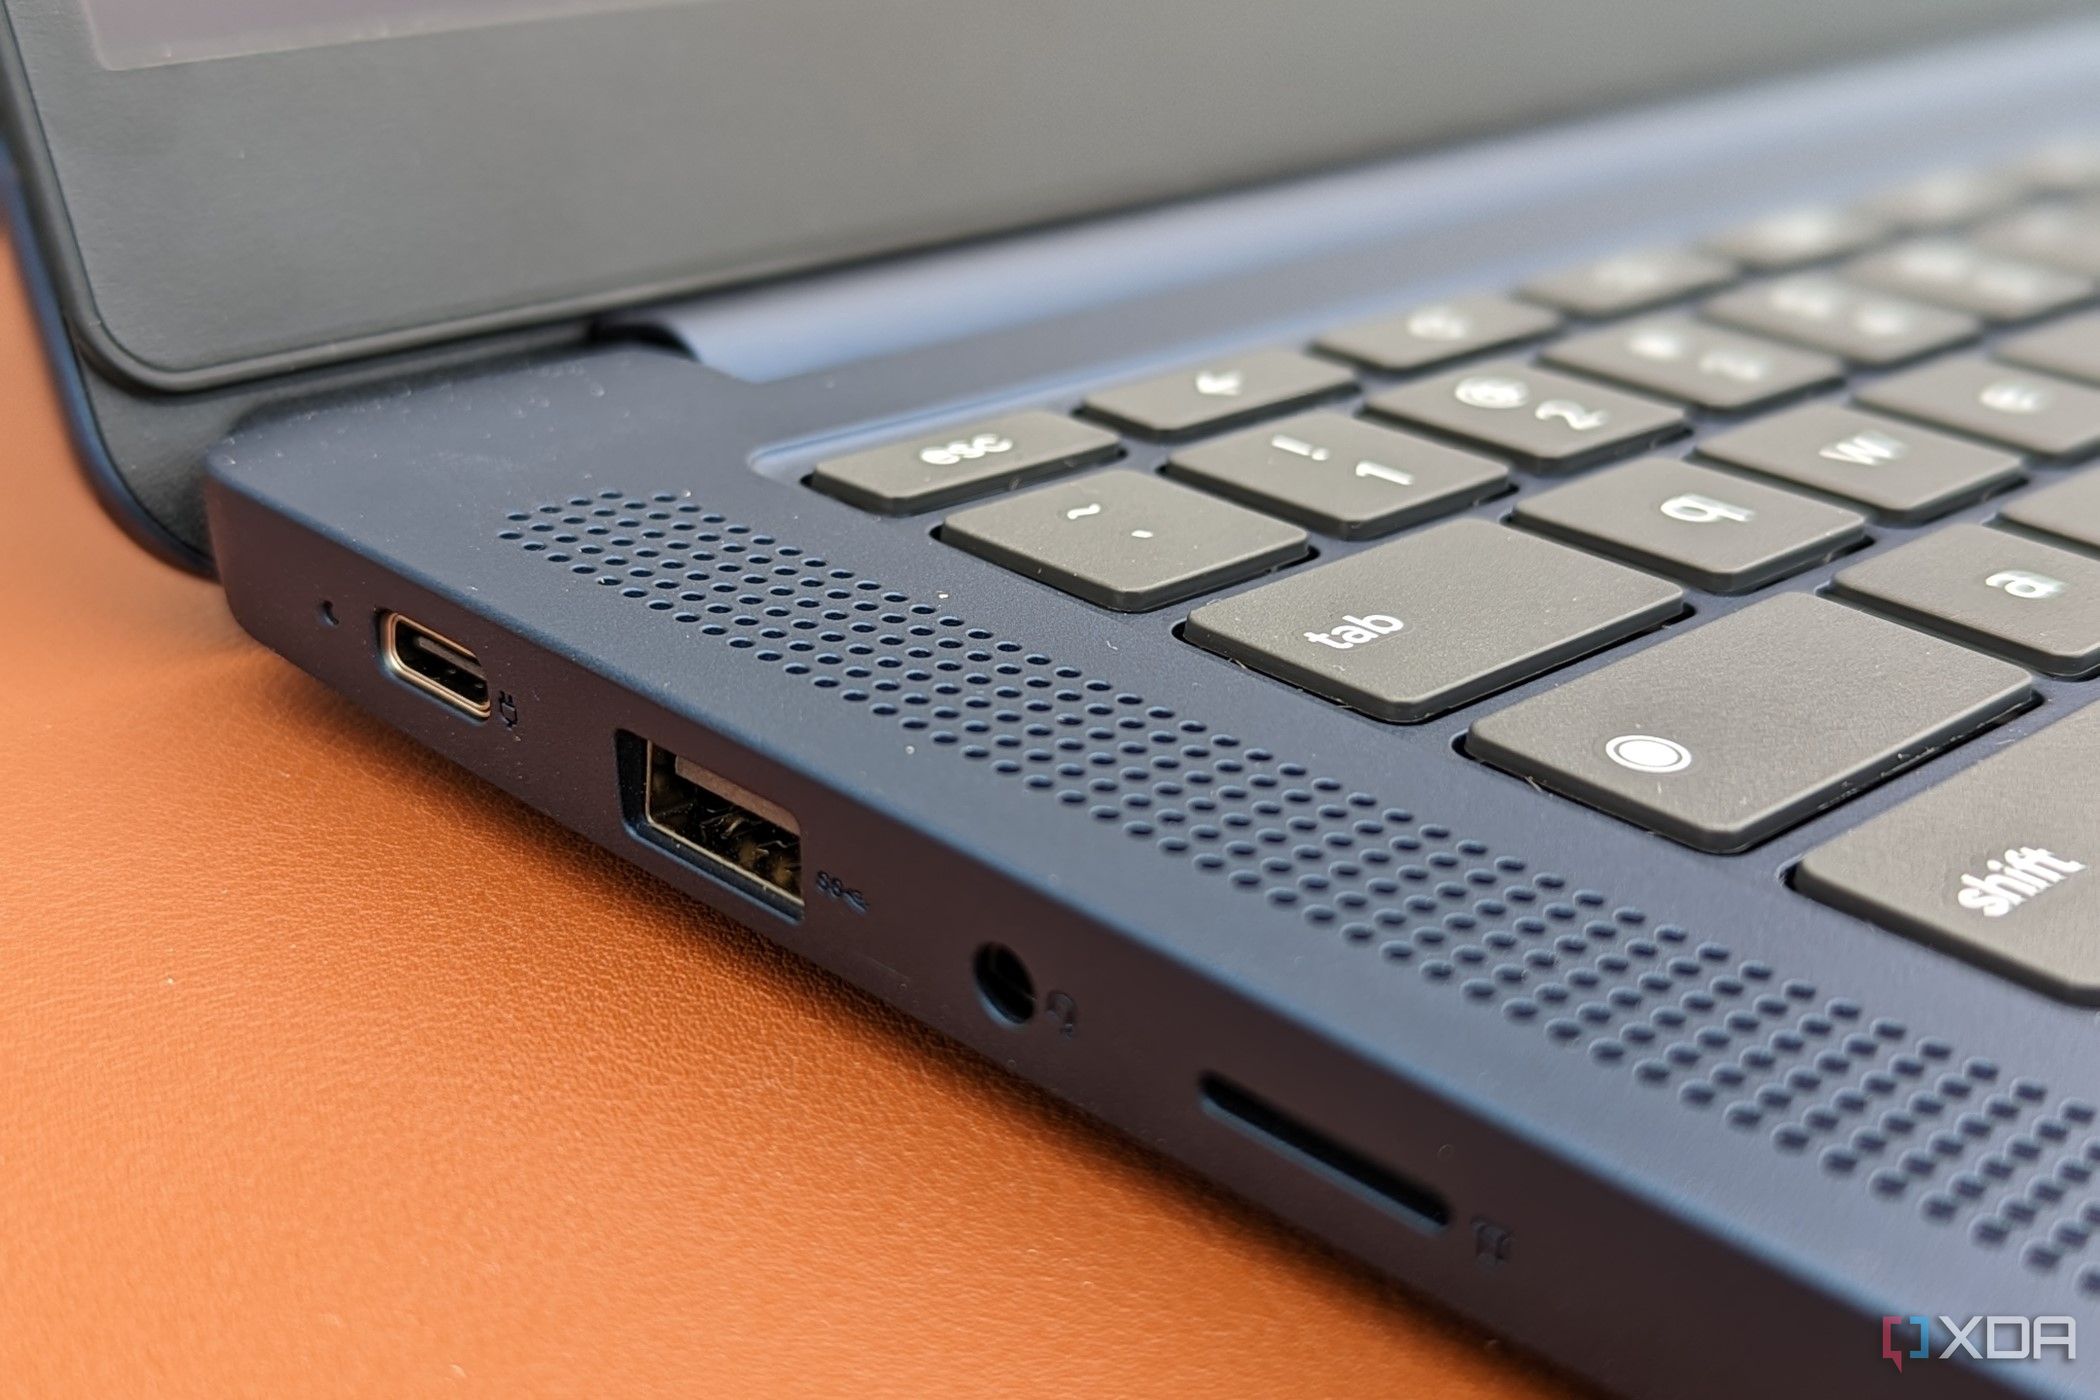 Lenovo IdeaPad Slim 3 Chromebook review: Affordable and long